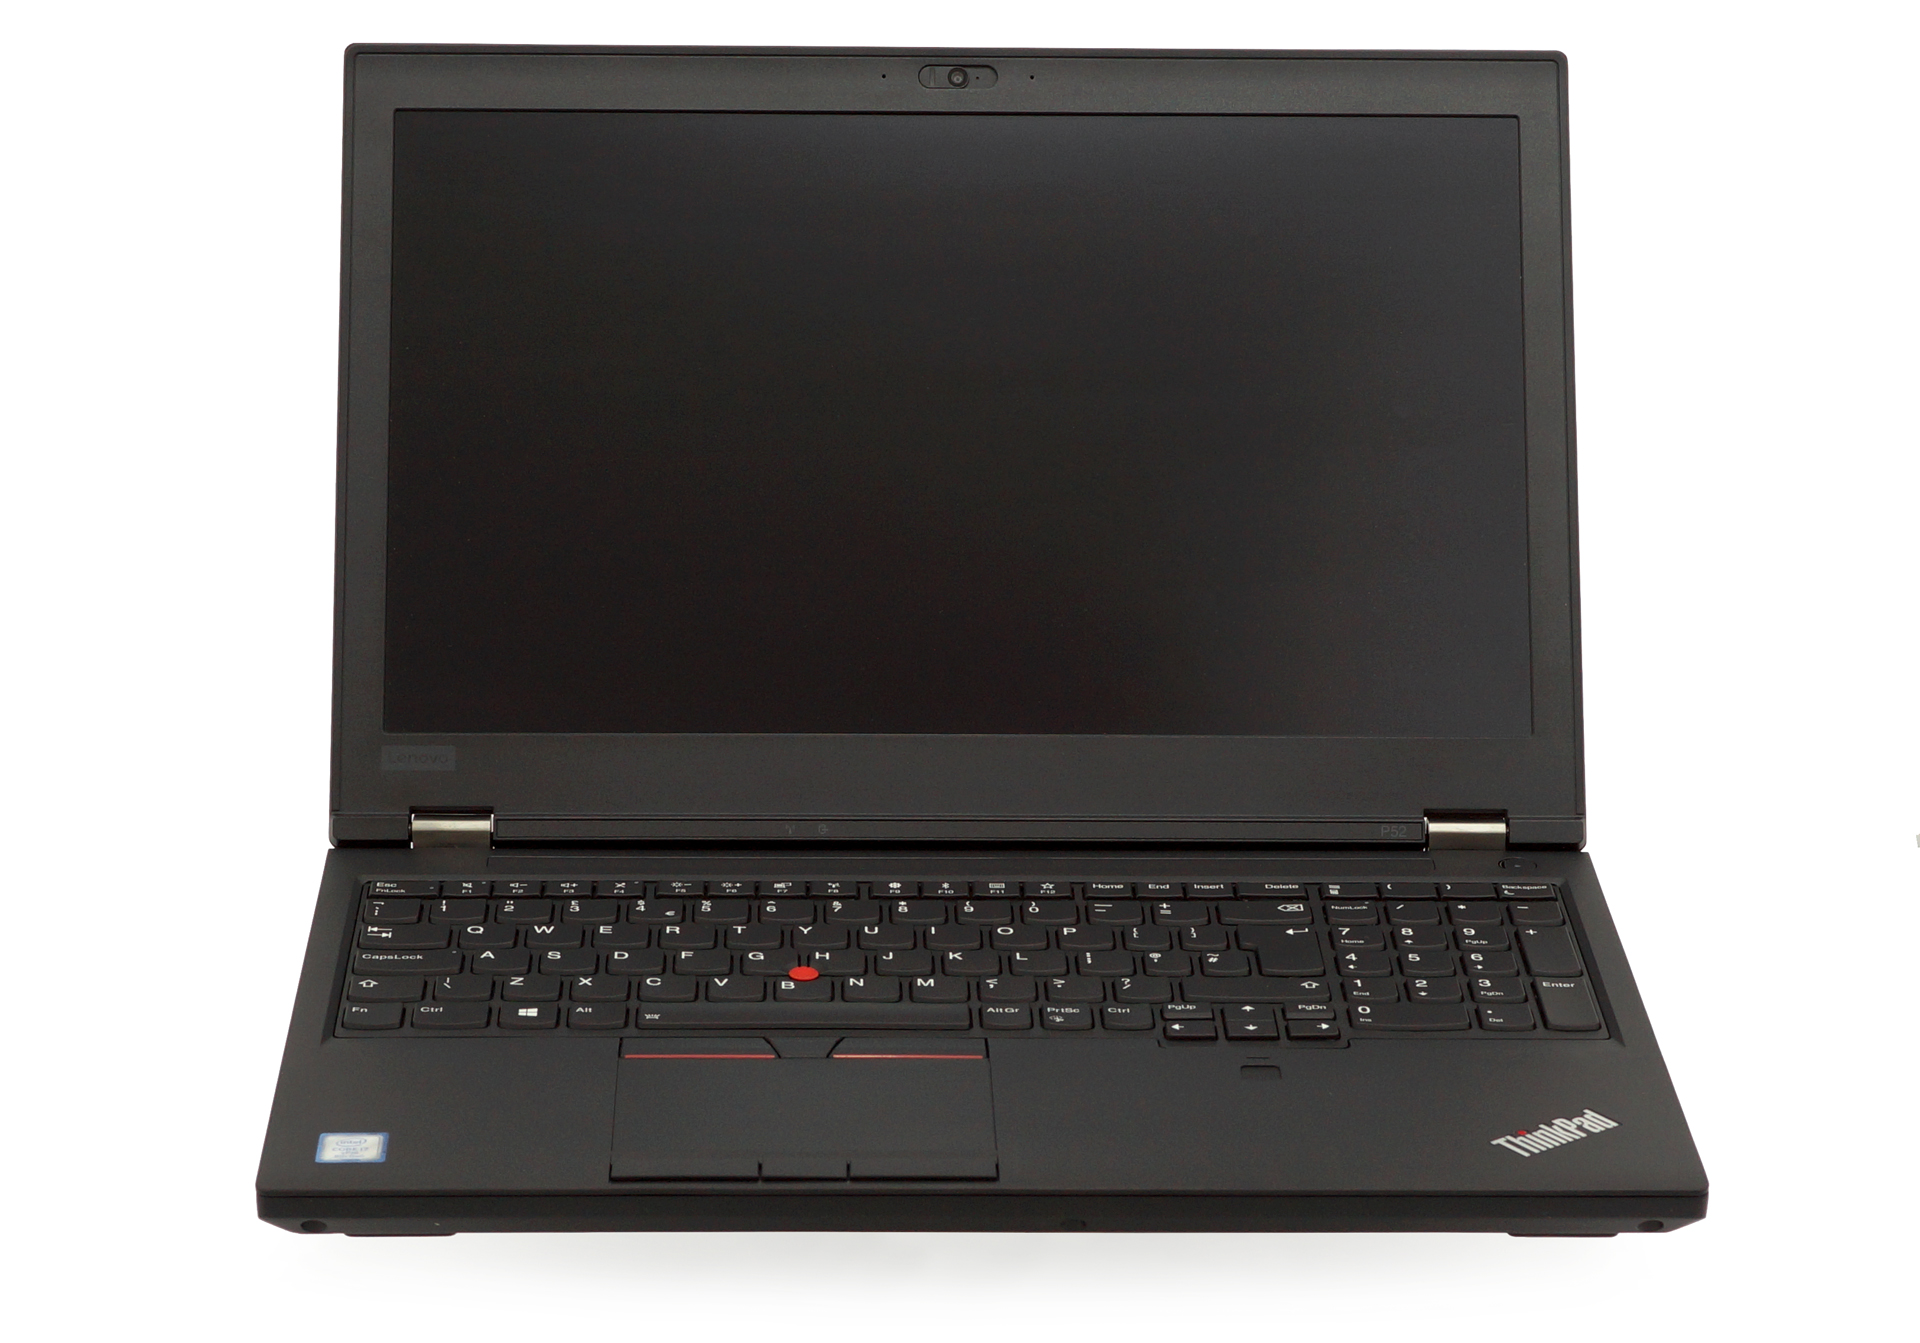 Lenovo ThinkPad P52 review - workstation with brand new hardware